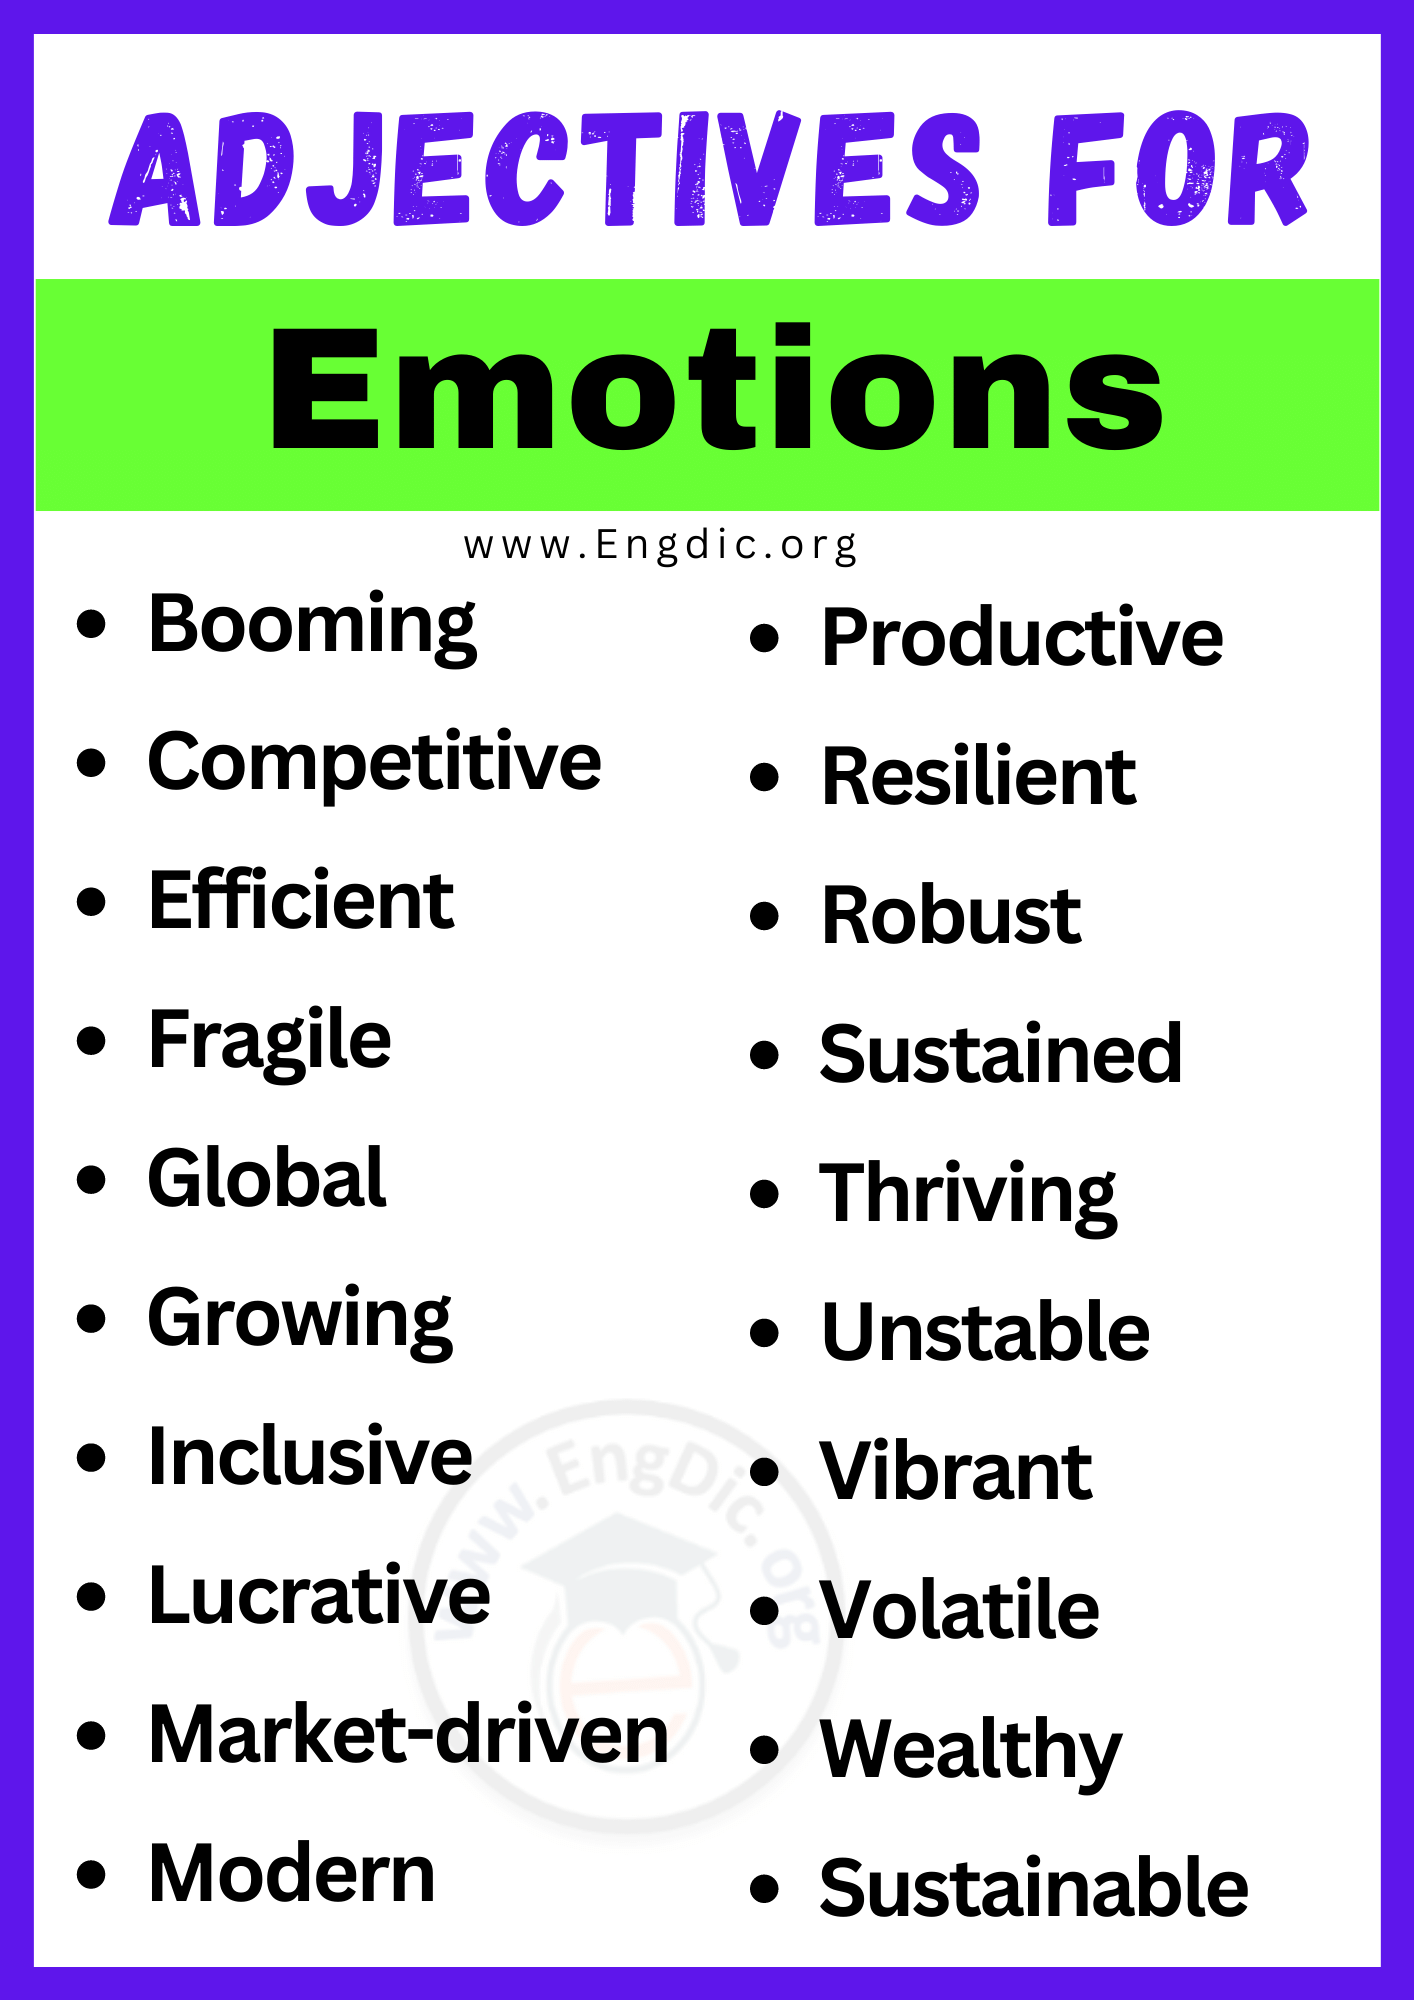 Adjectives for Emotions